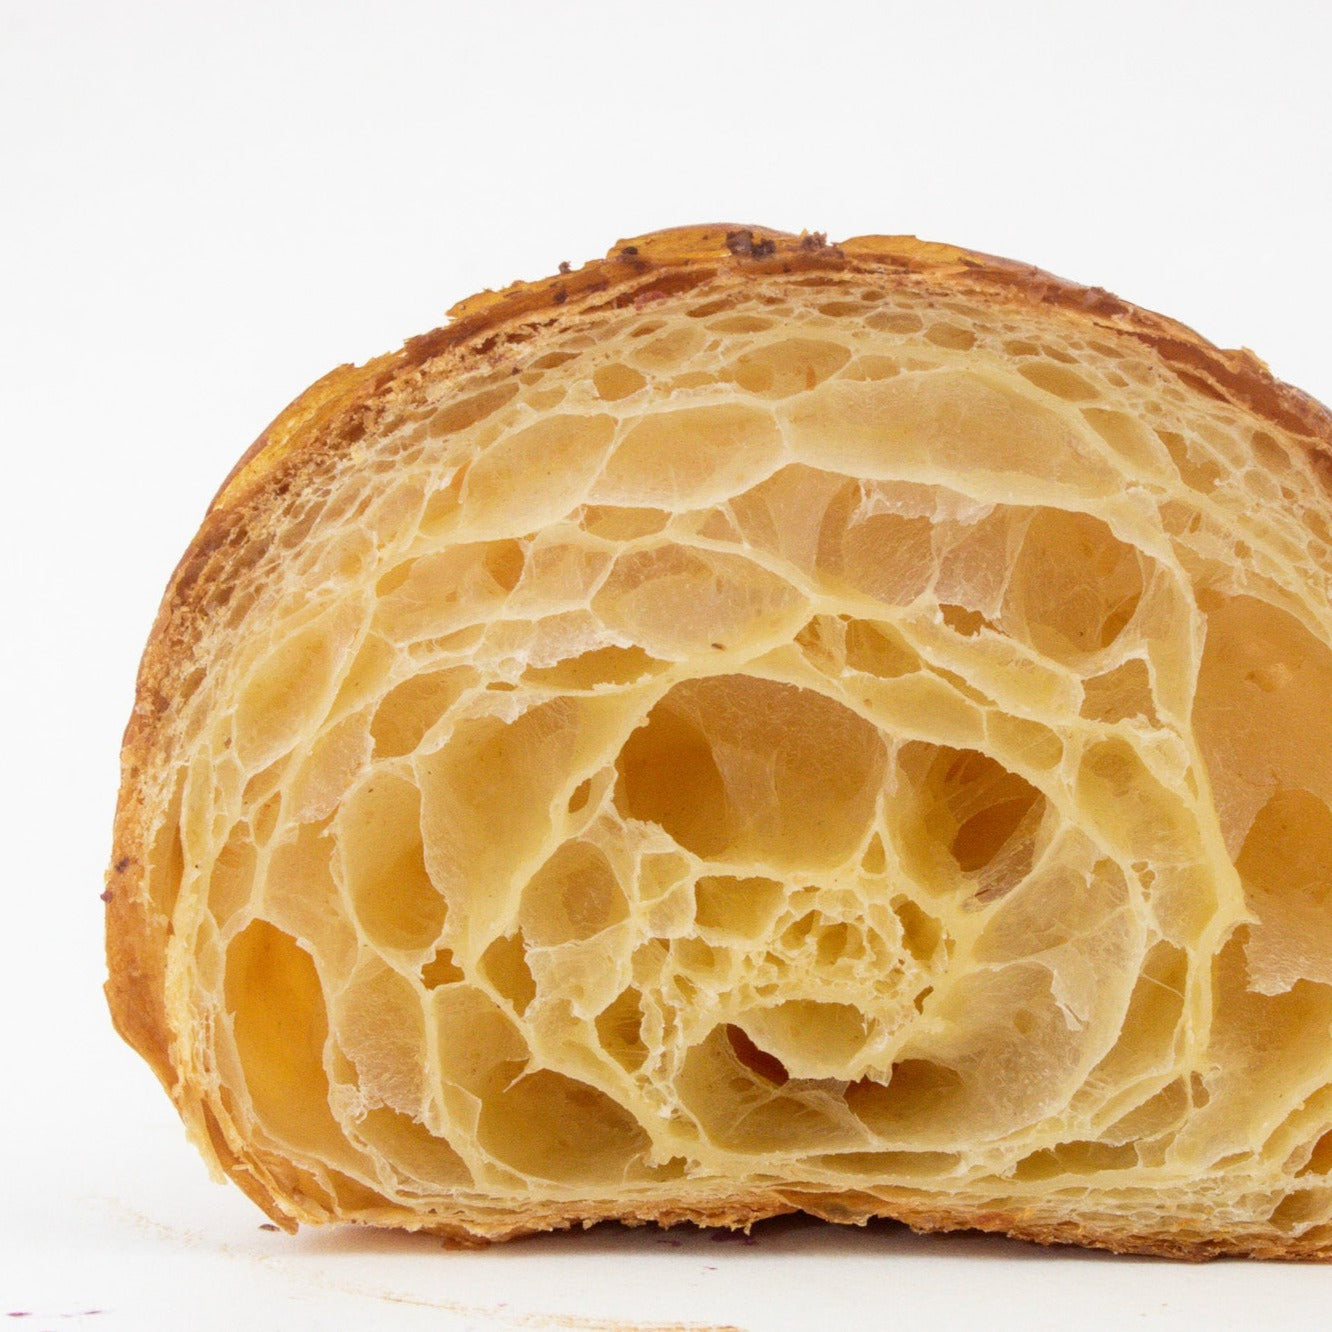 image of the inside of a croissant that has been cut in half to show the layers & lamination